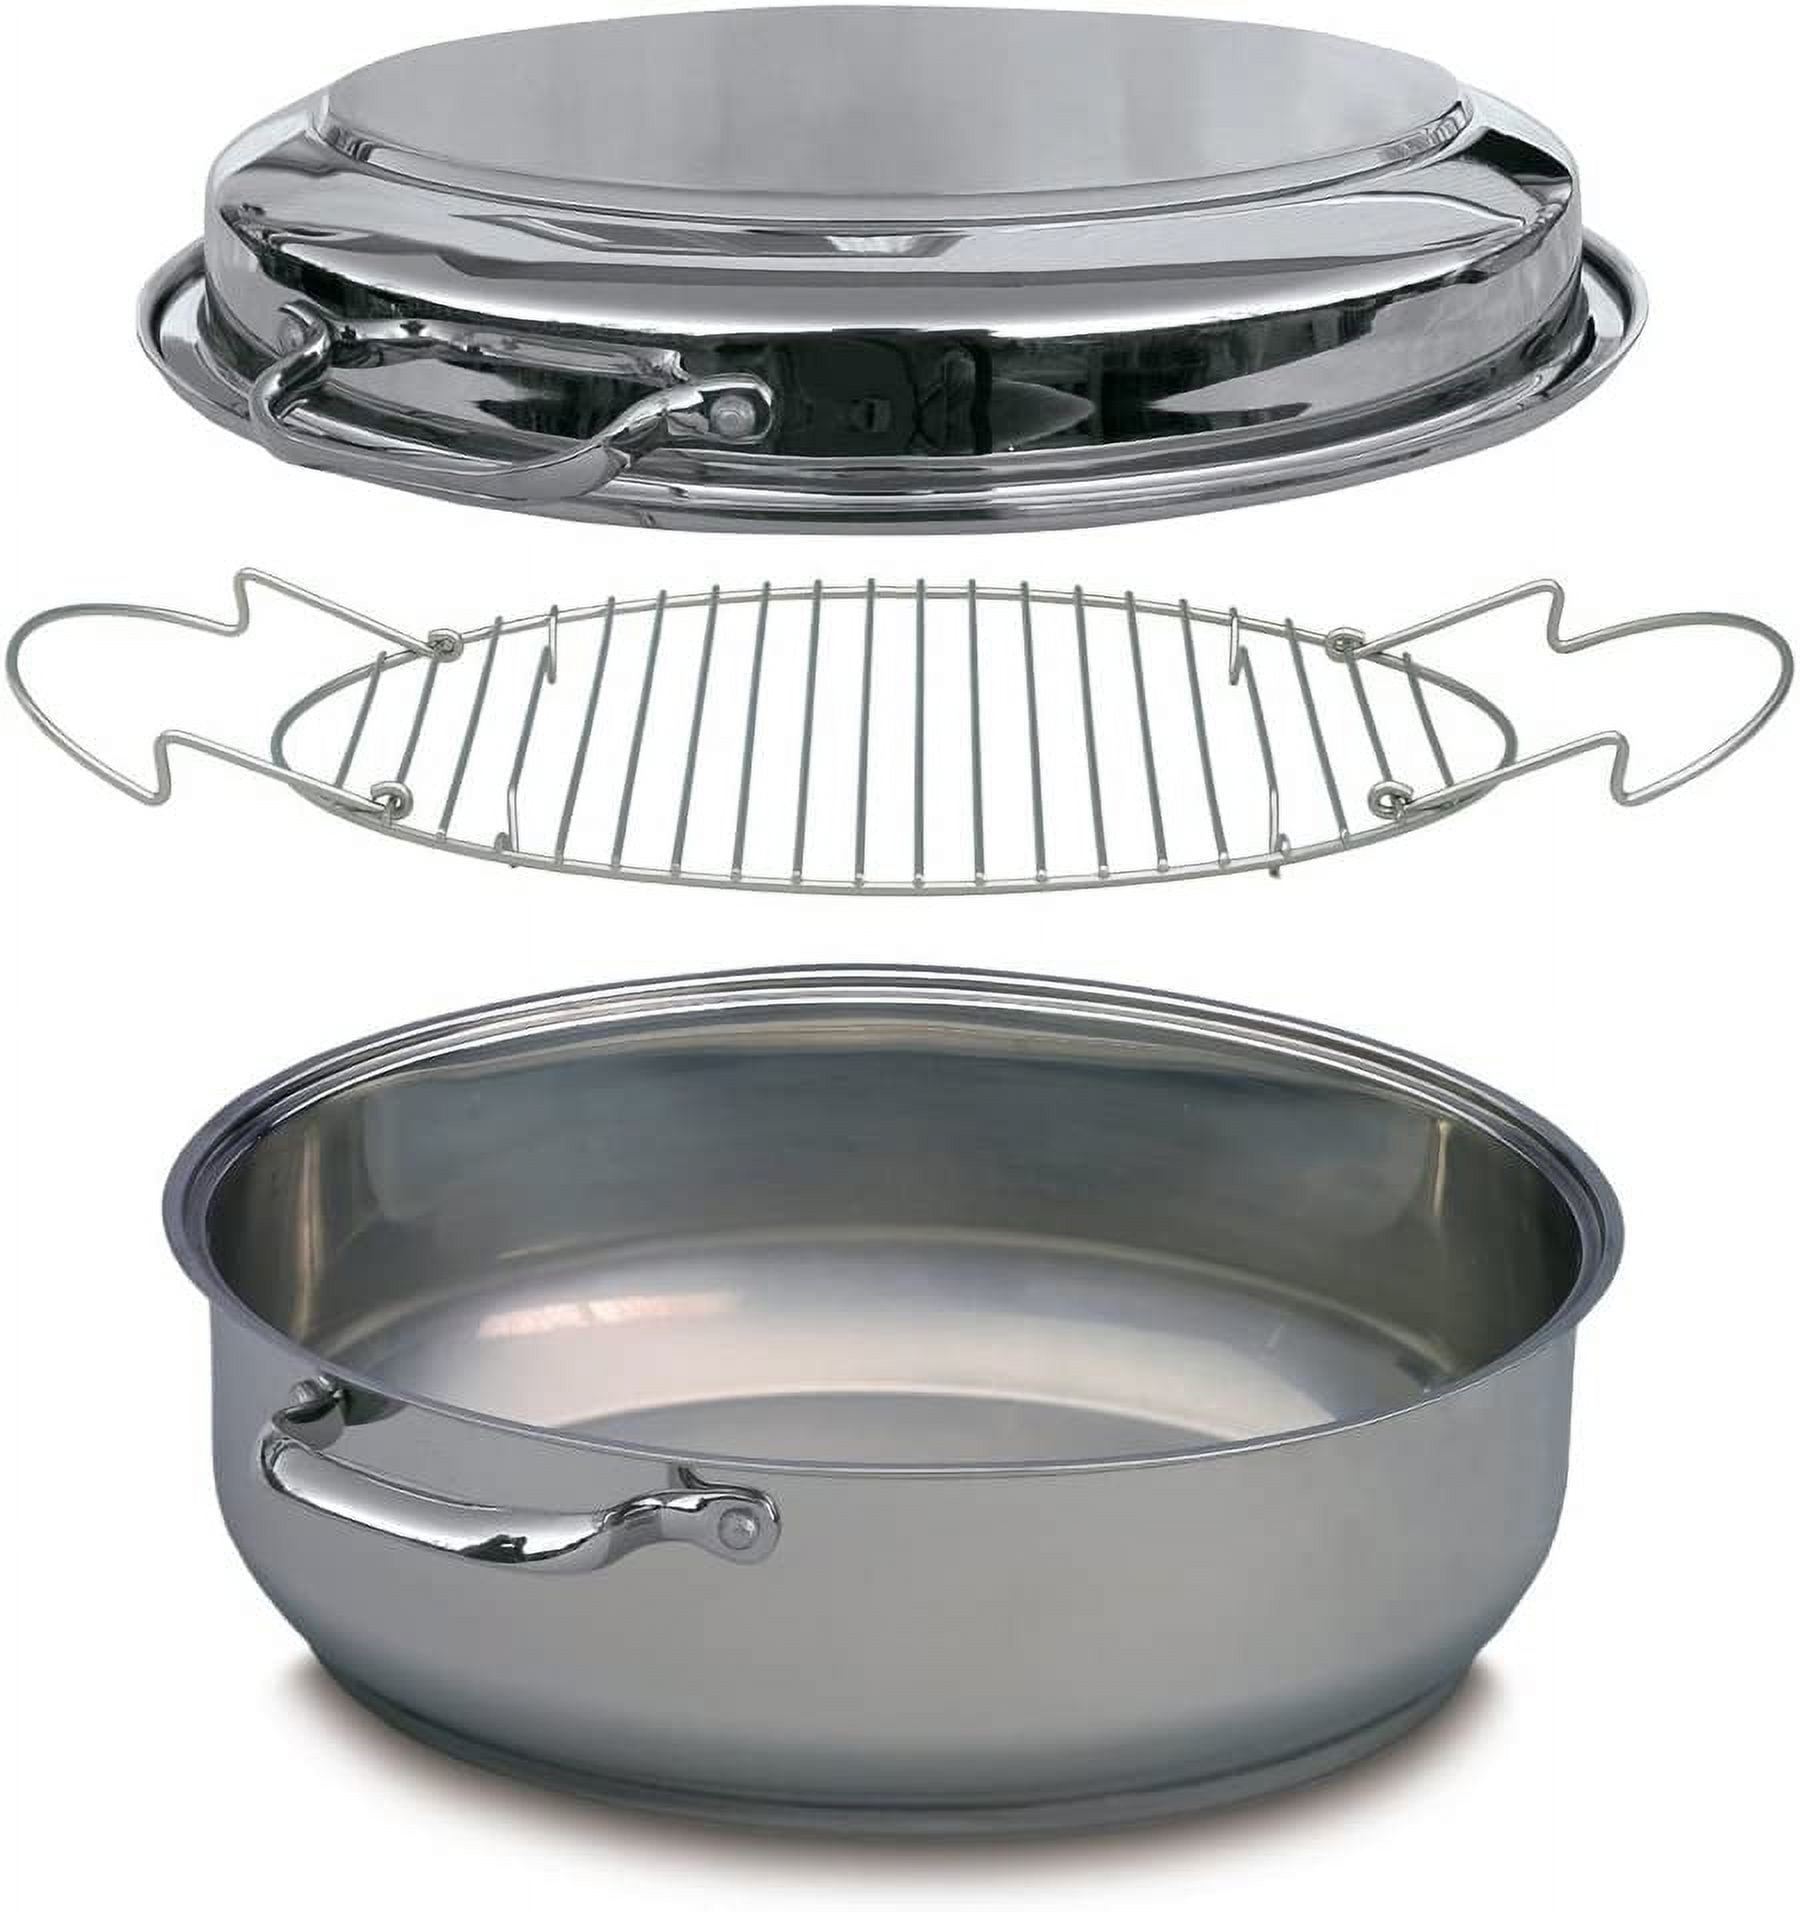 Stainless Steel Oval Lidded Roaster Pan - Poultry Roasting Pan w Rack -  Oven Cookware Fish Steamer Stock Pot - Compatible with all kinds of stoves  - 3